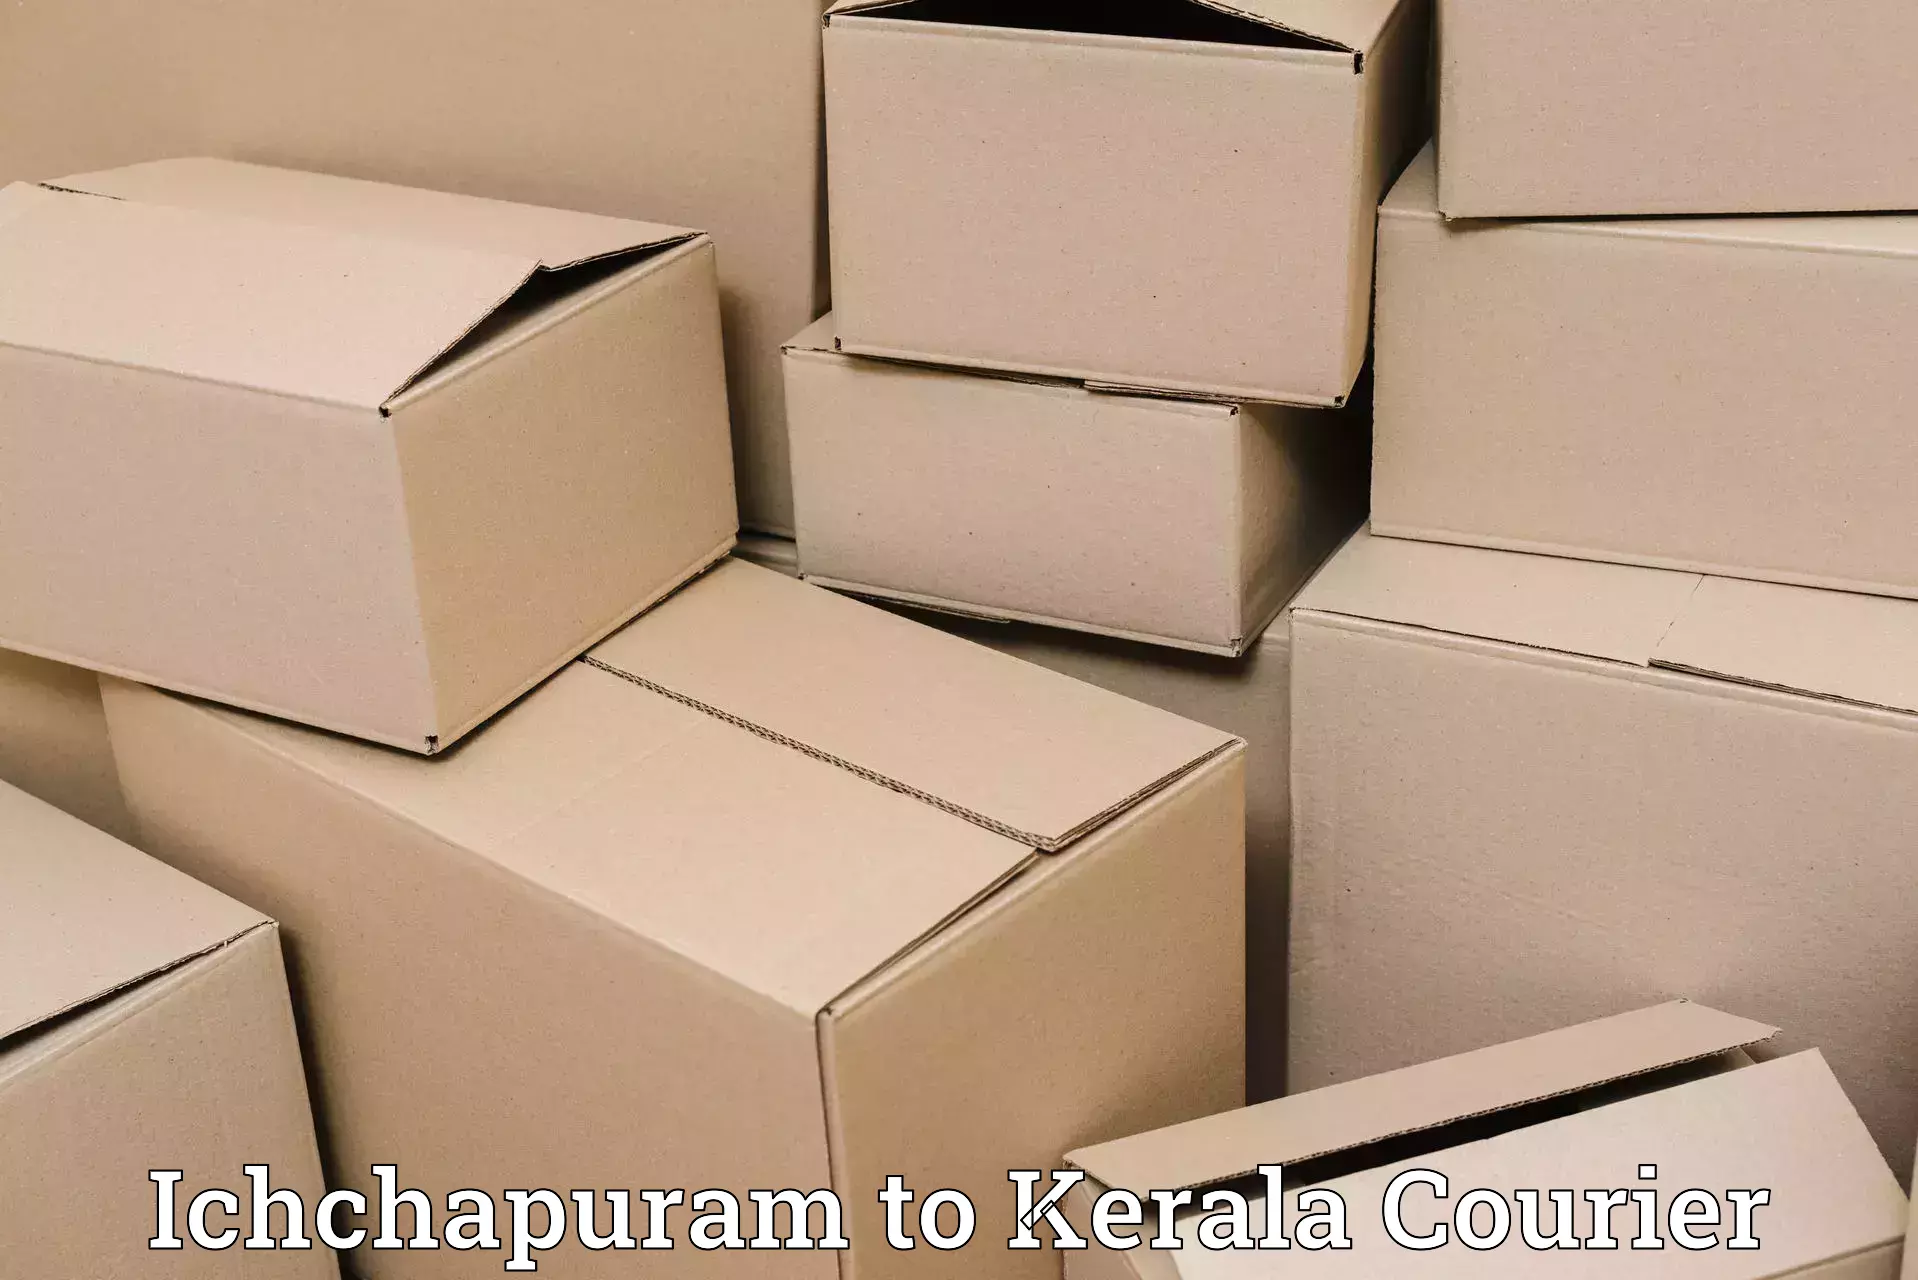 Flexible delivery schedules Ichchapuram to Cochin University of Science and Technology